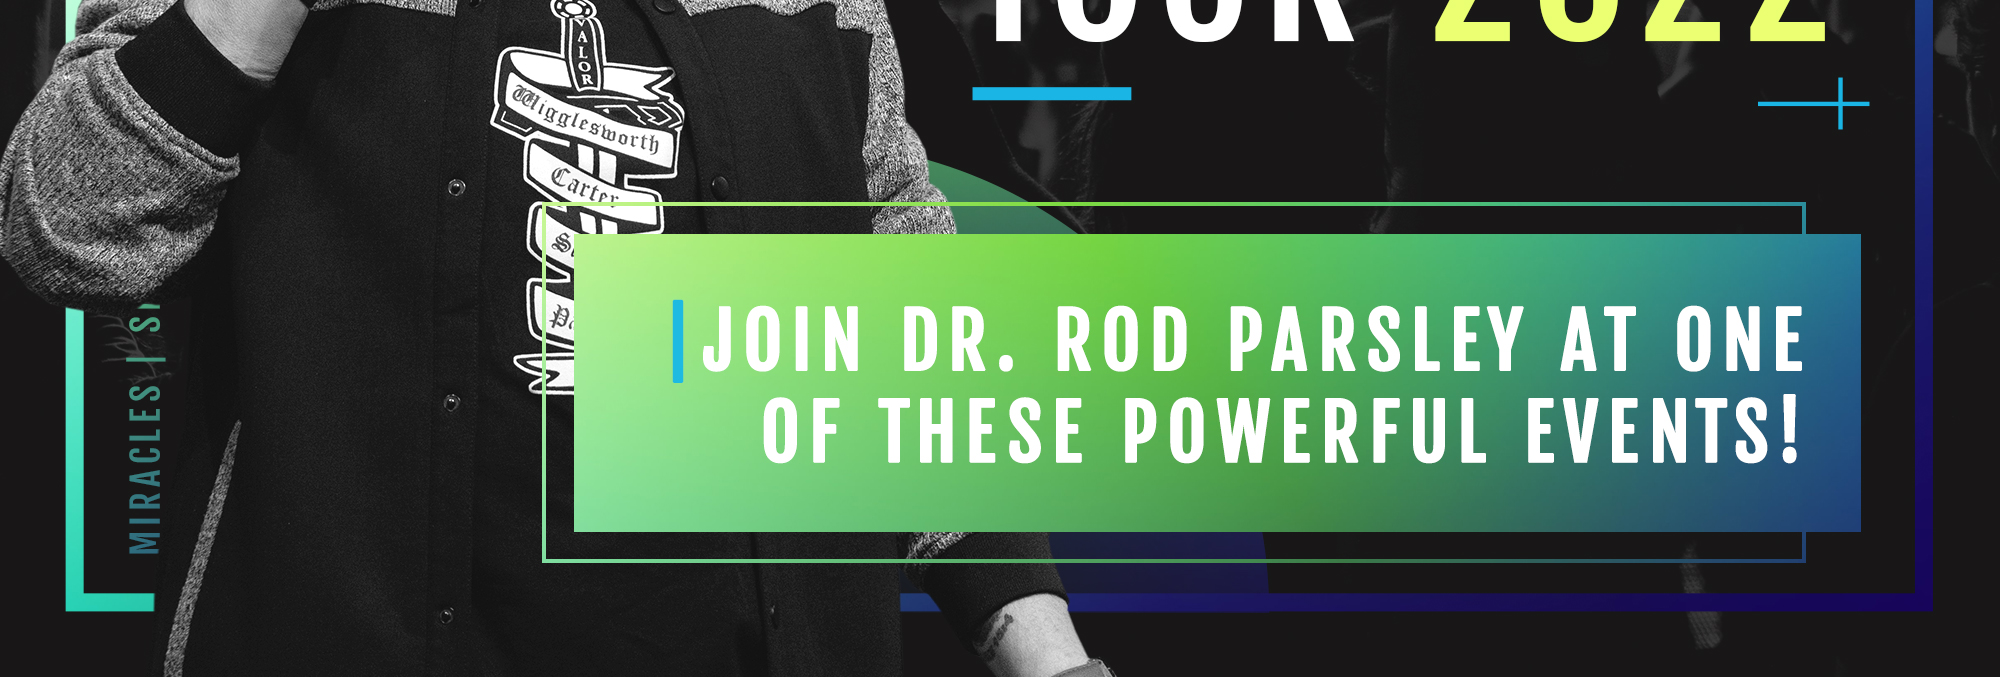 Join Dr. Rod Parsley at One of These Powerful Events!